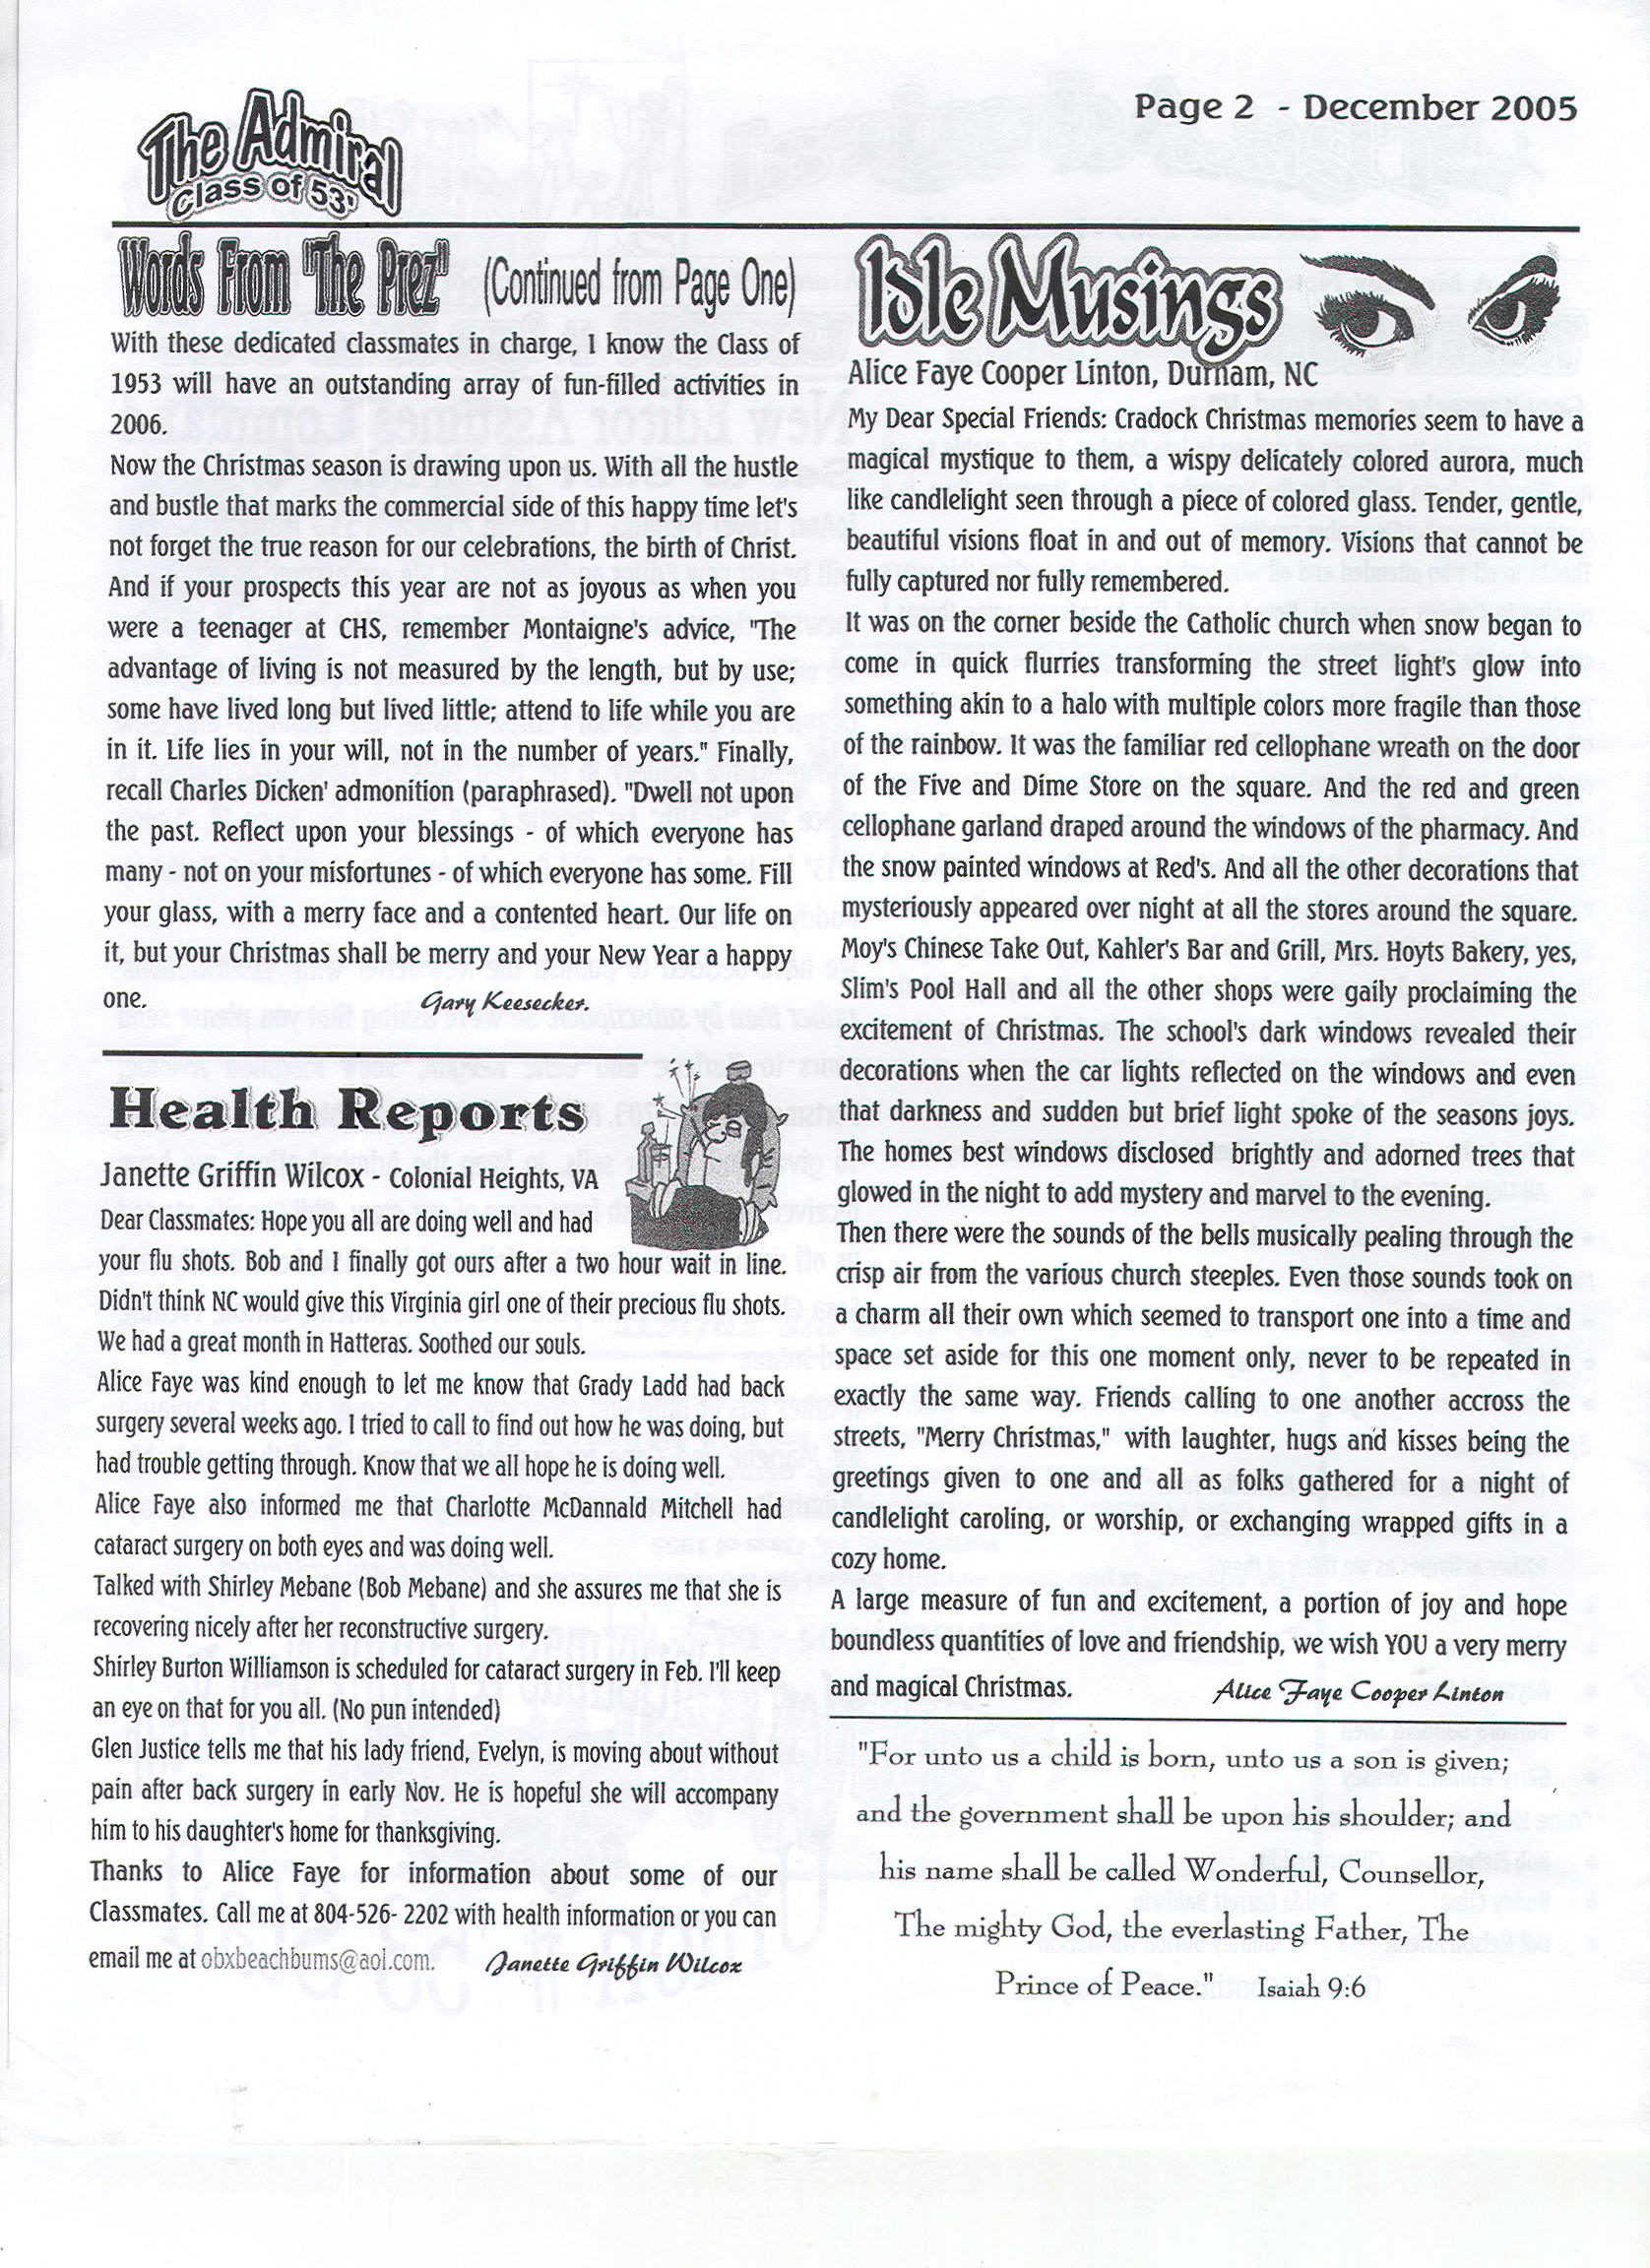 The Admiral - December 2005 - pg. 2